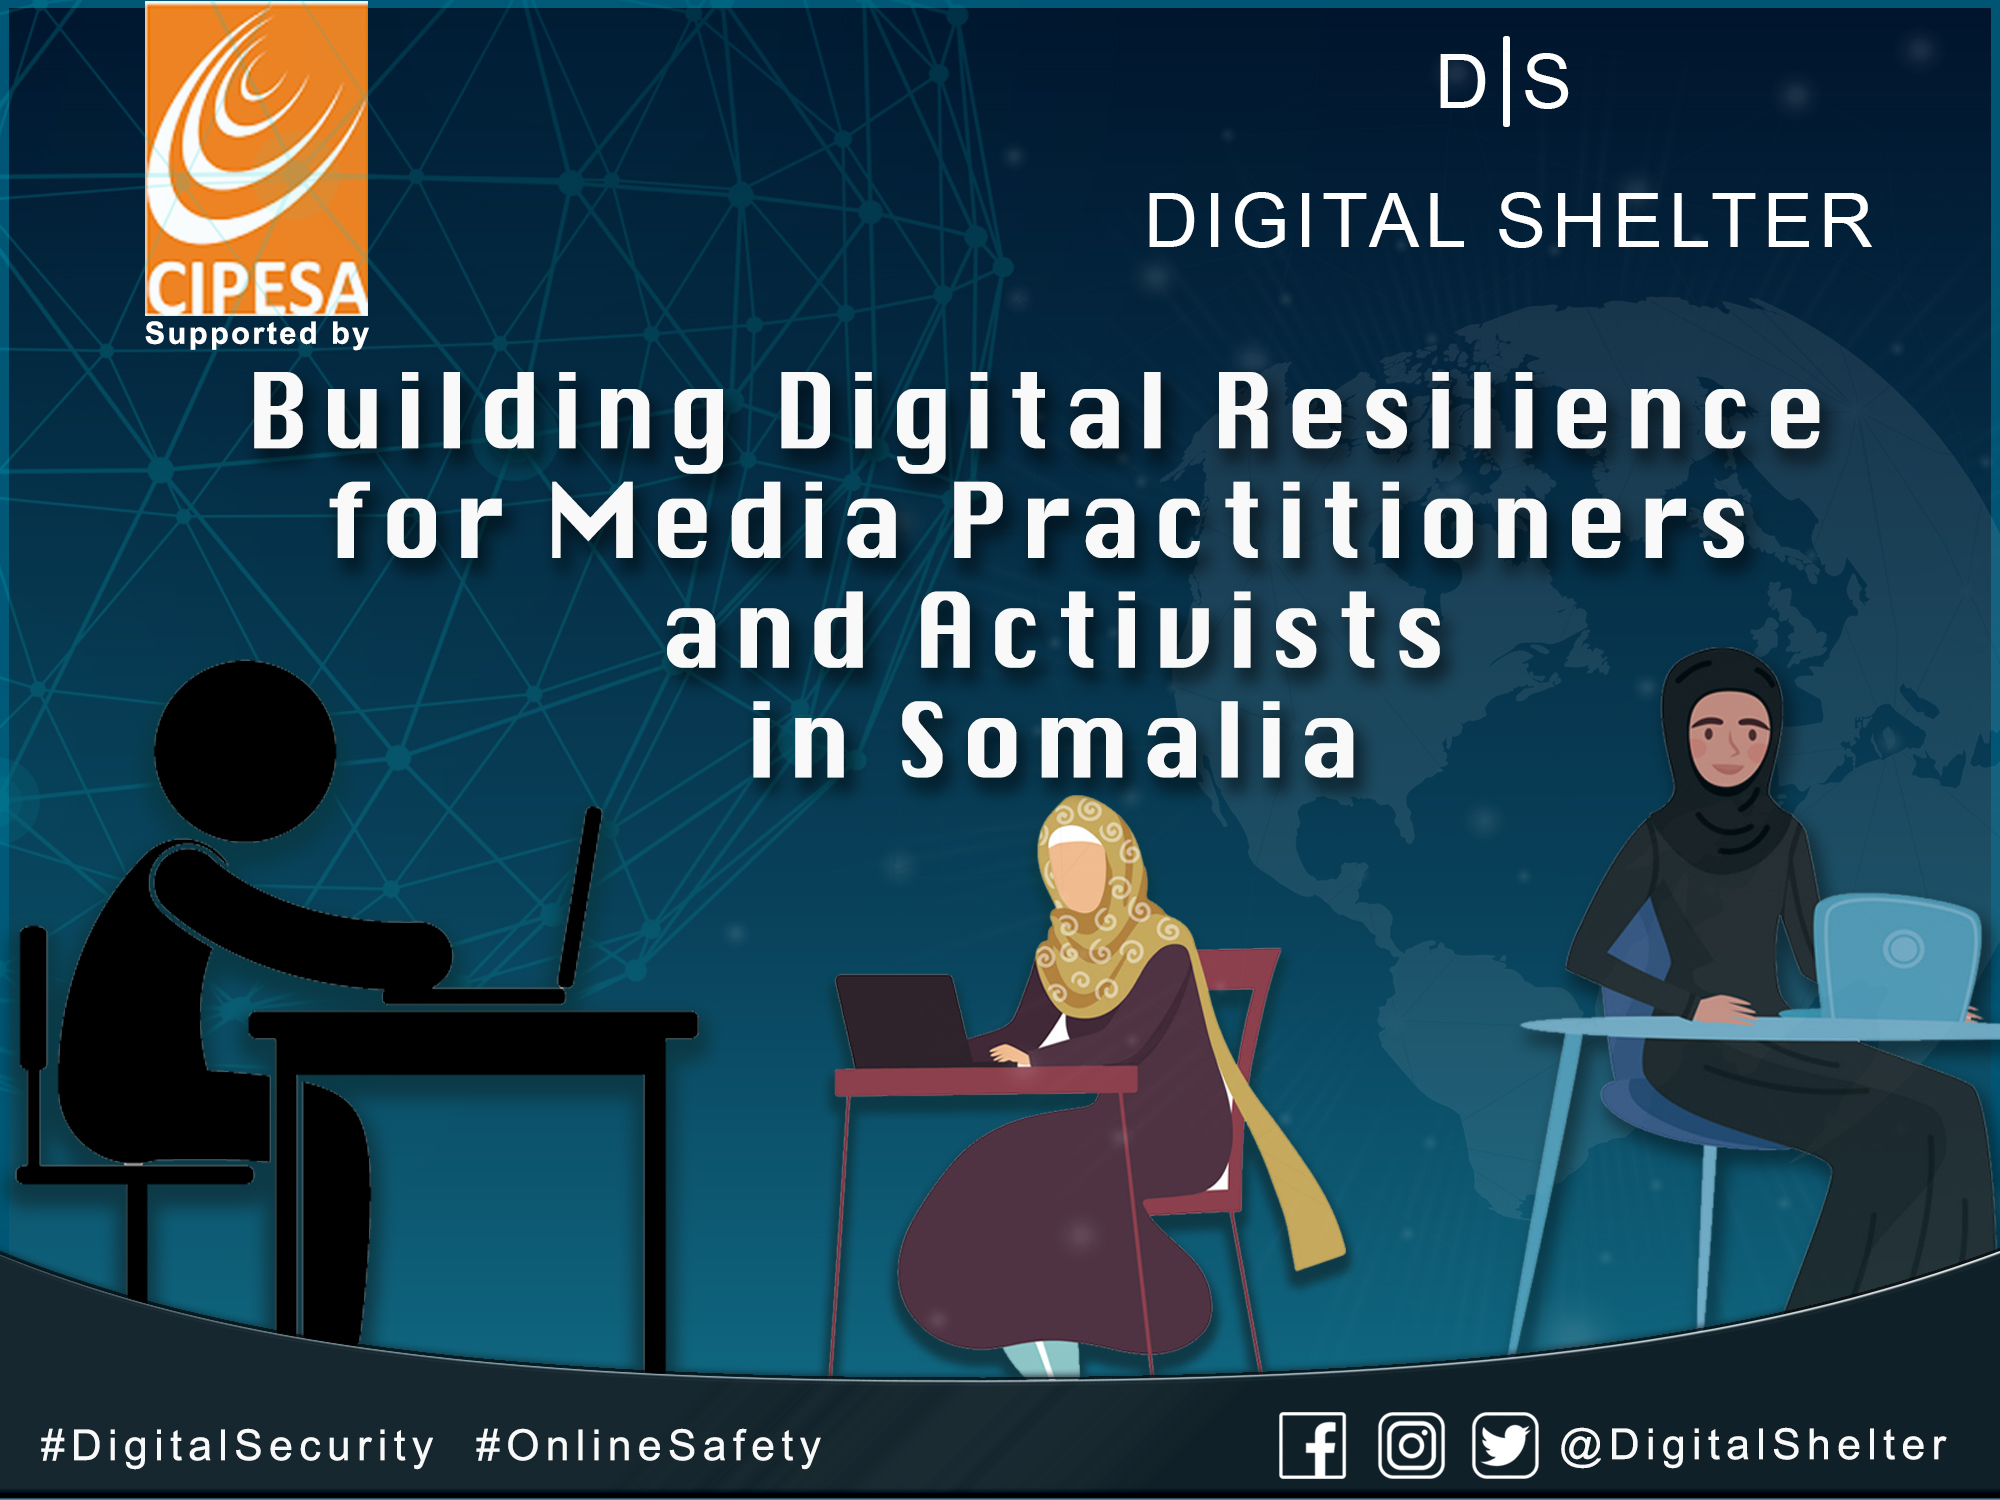 Building Digital Resilience for Media Practitioners & Activists